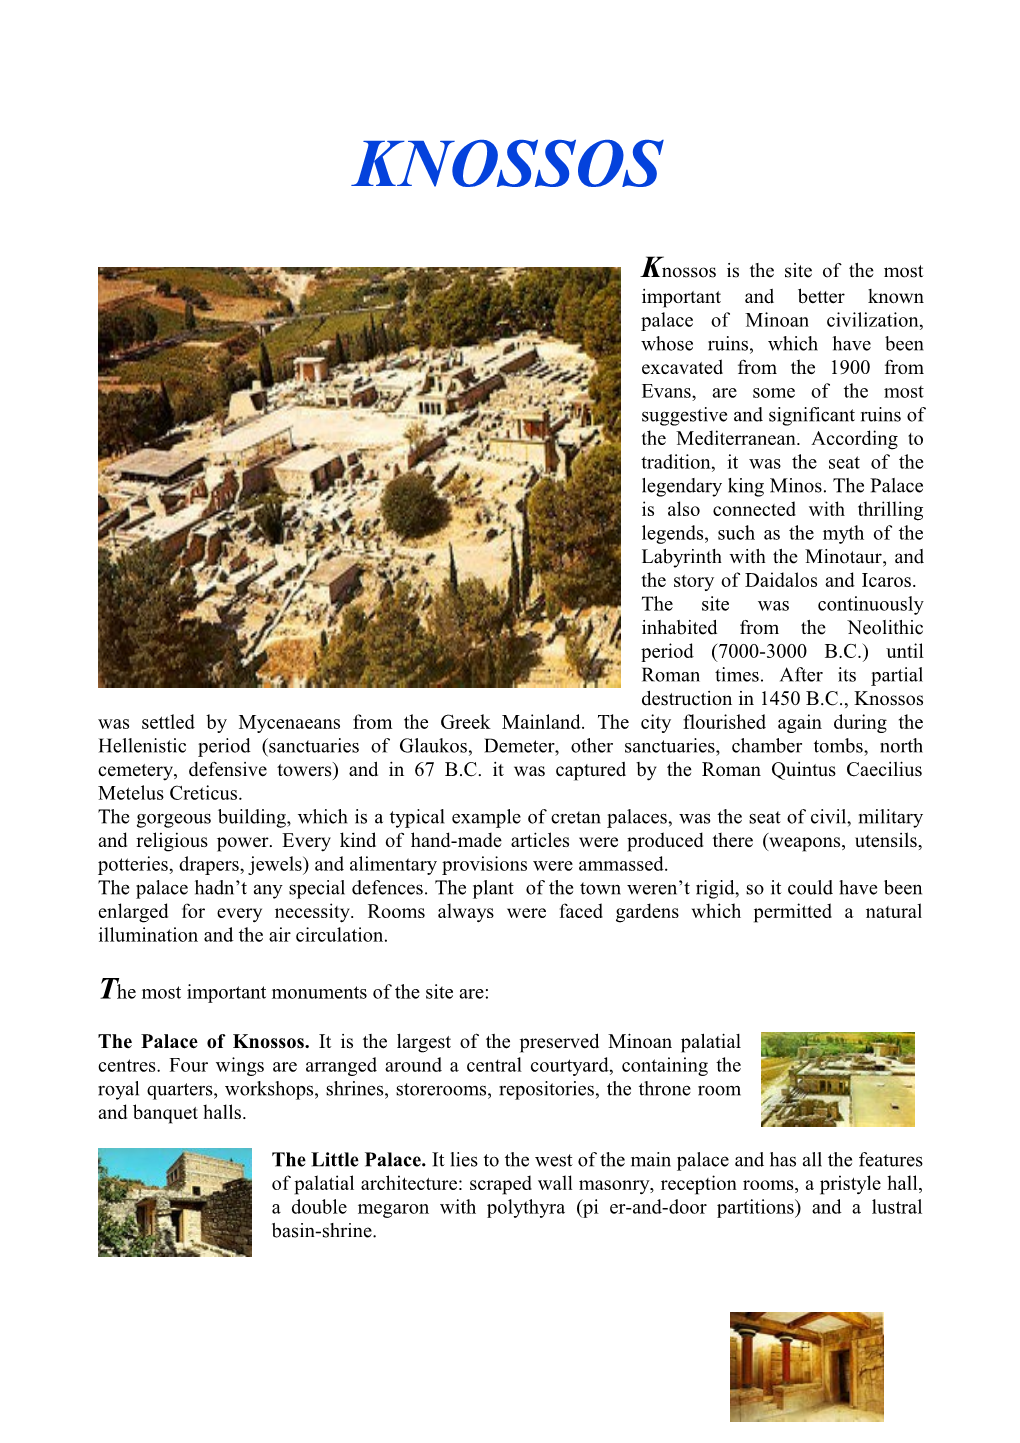 Knossos Is the Site of the Most Important and Better Known Palace of Minoan Civilization